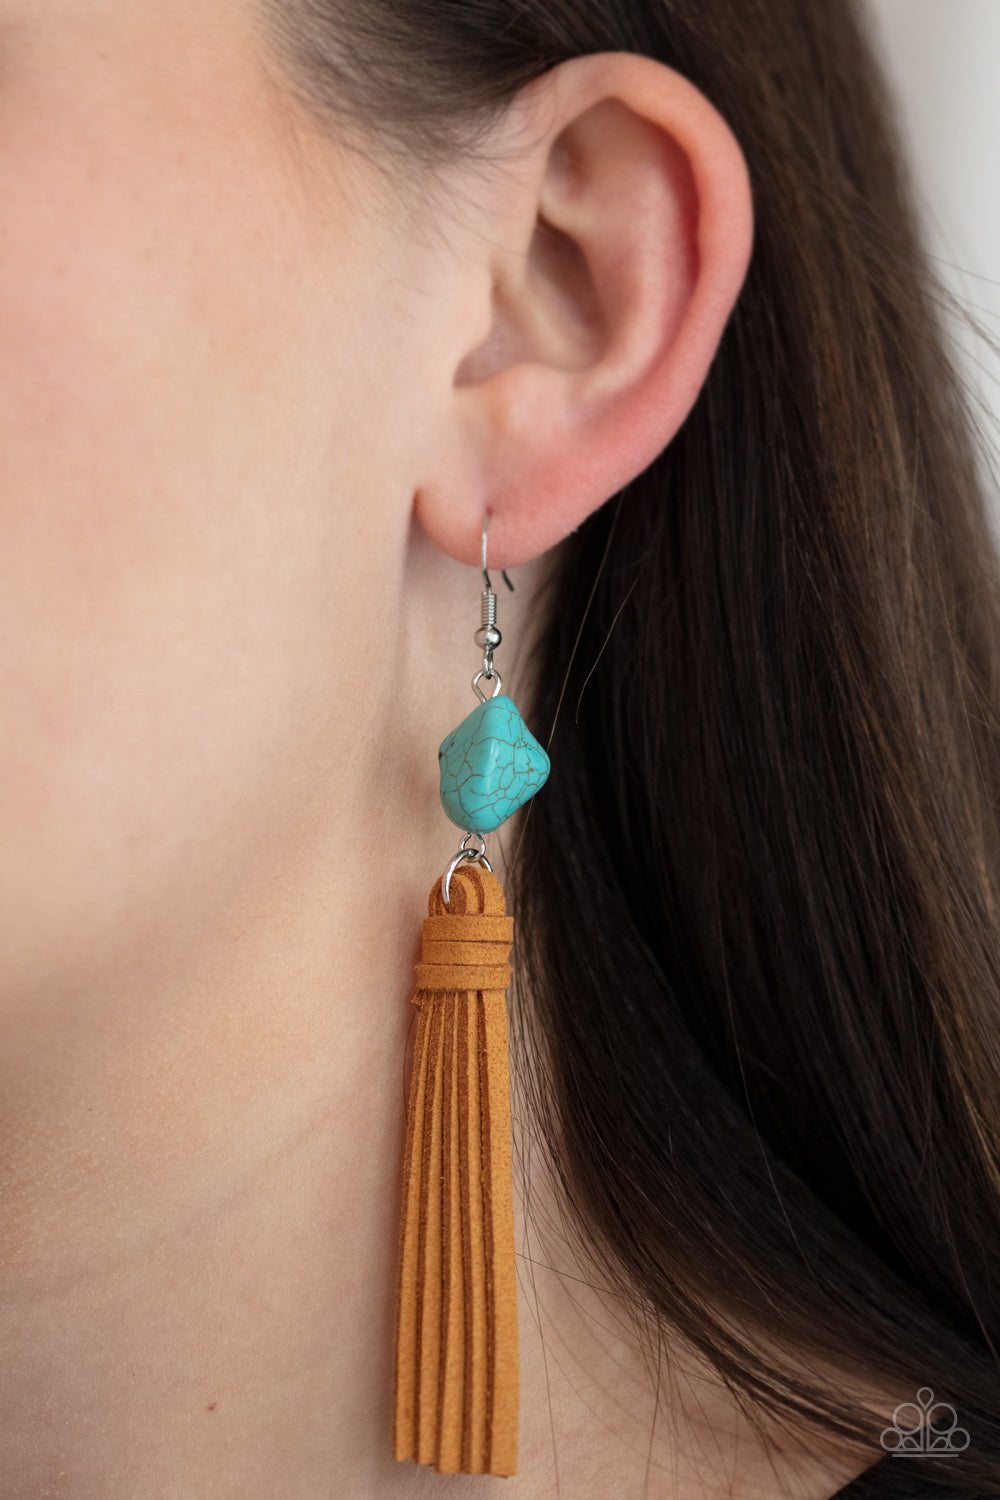 Paparazzi Accessories All-Natural Allure - Blue Earrings - Lady T Accessories